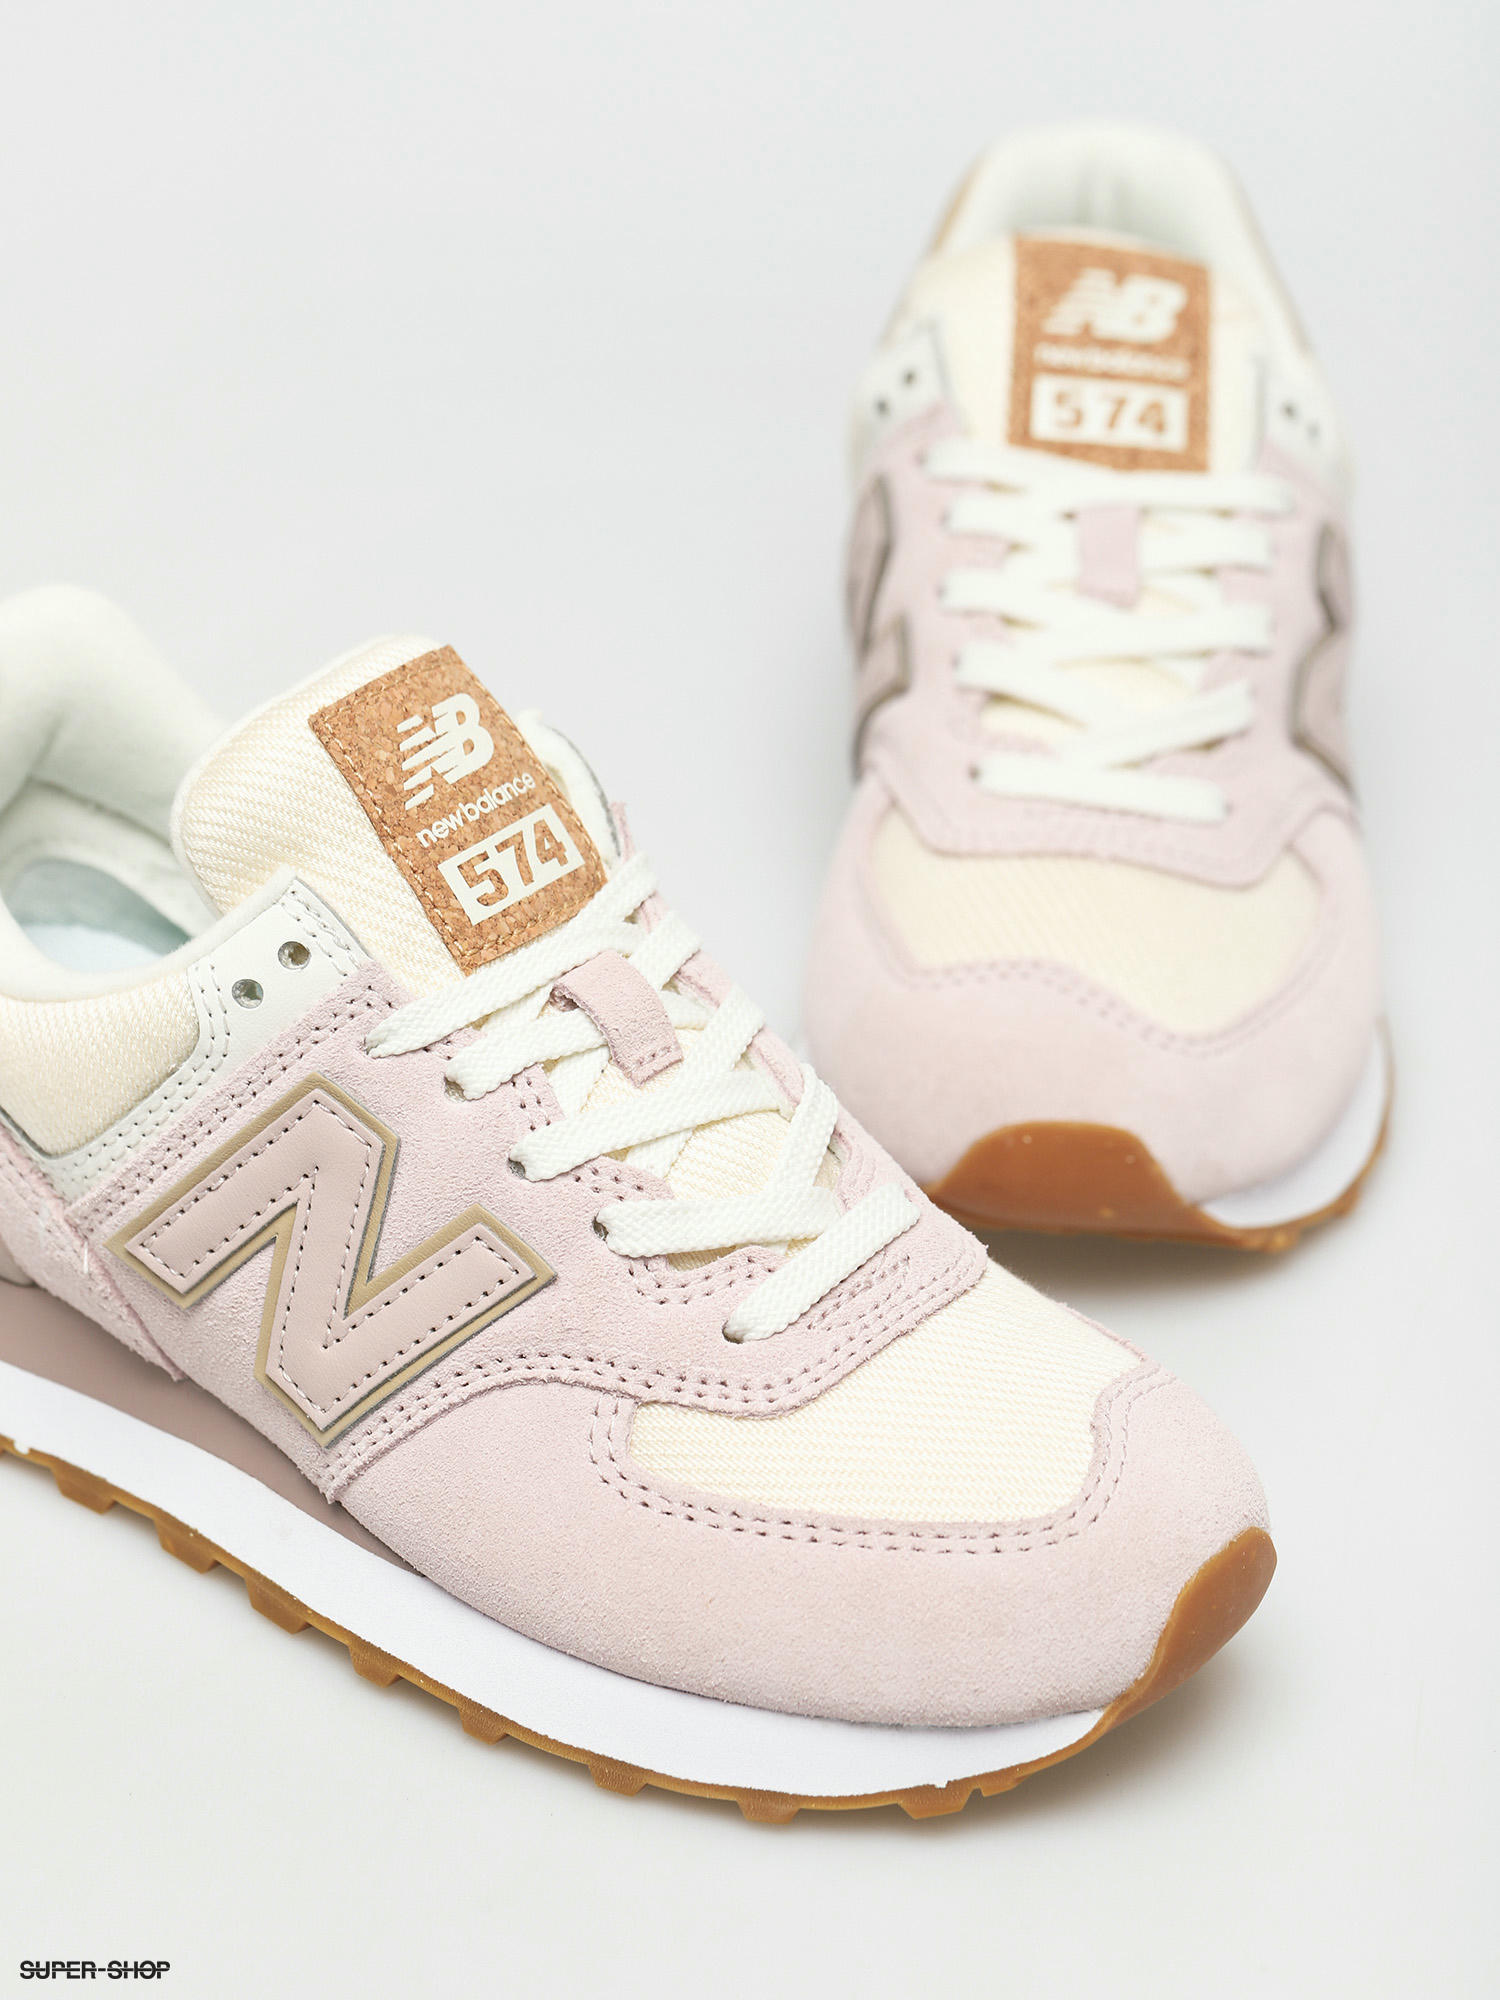 New Balance 574 Shoes Wmn (space pink)